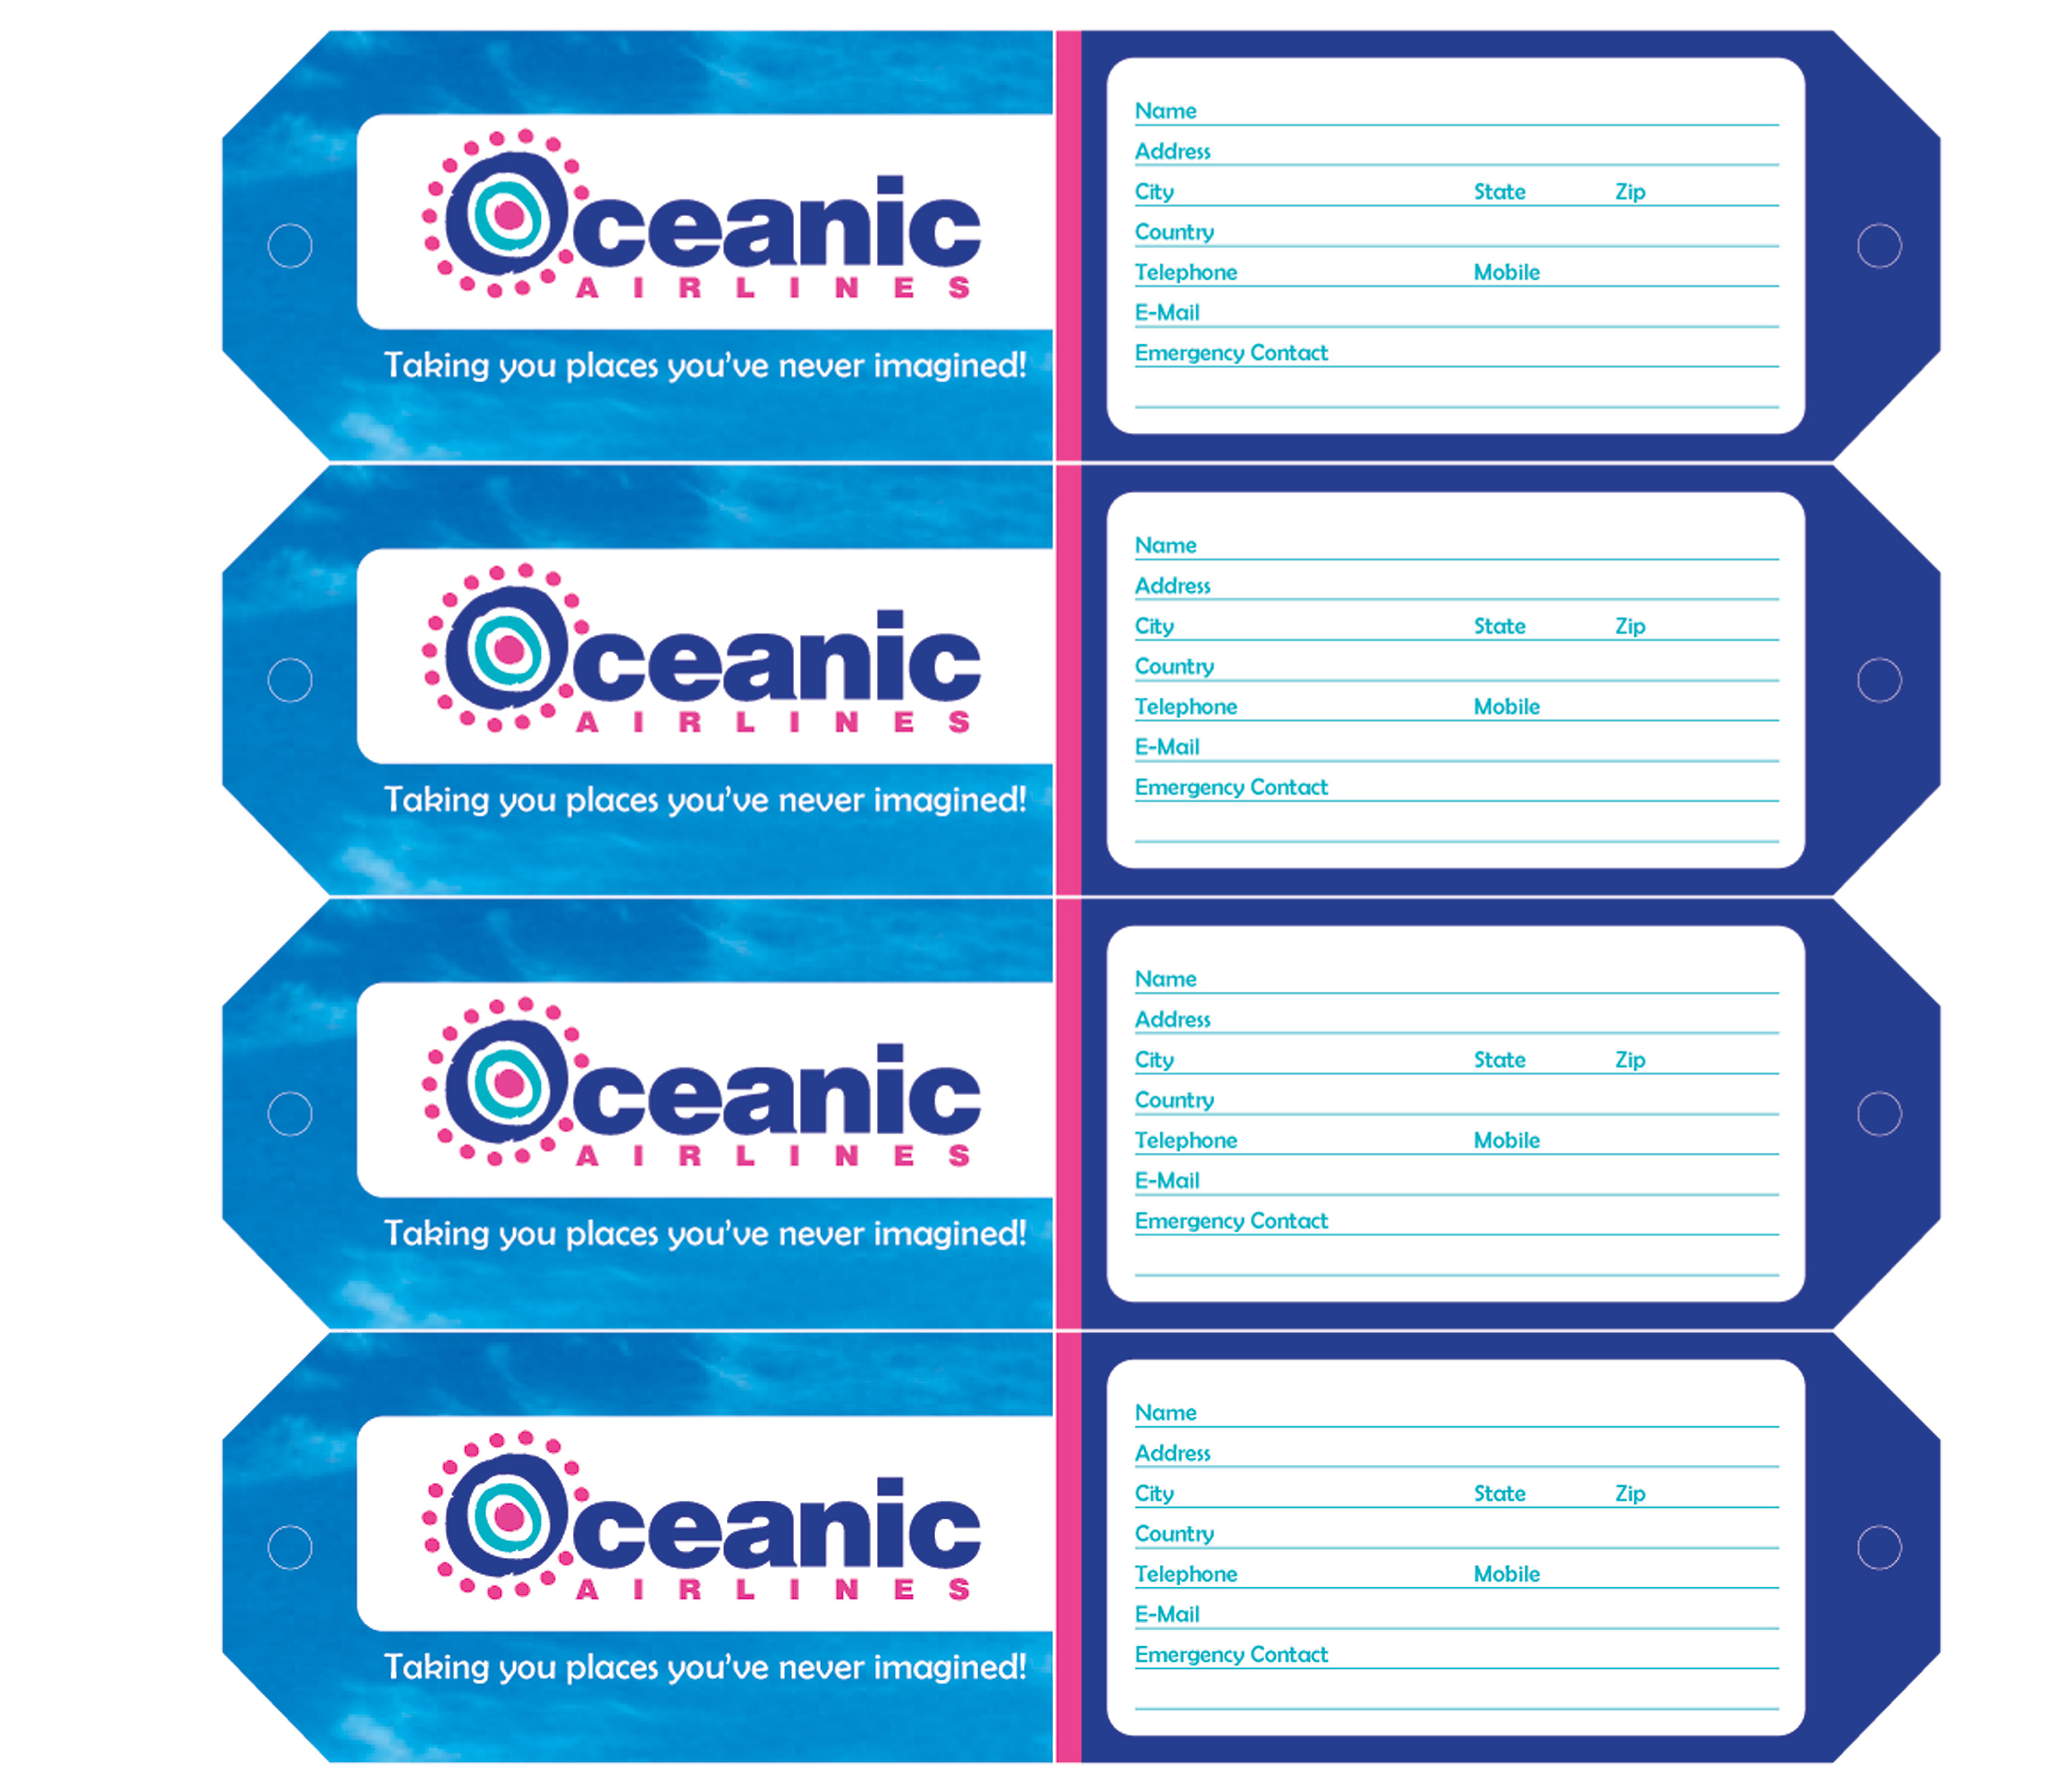 wackychimp-oceanic-airlines-luggage-tags